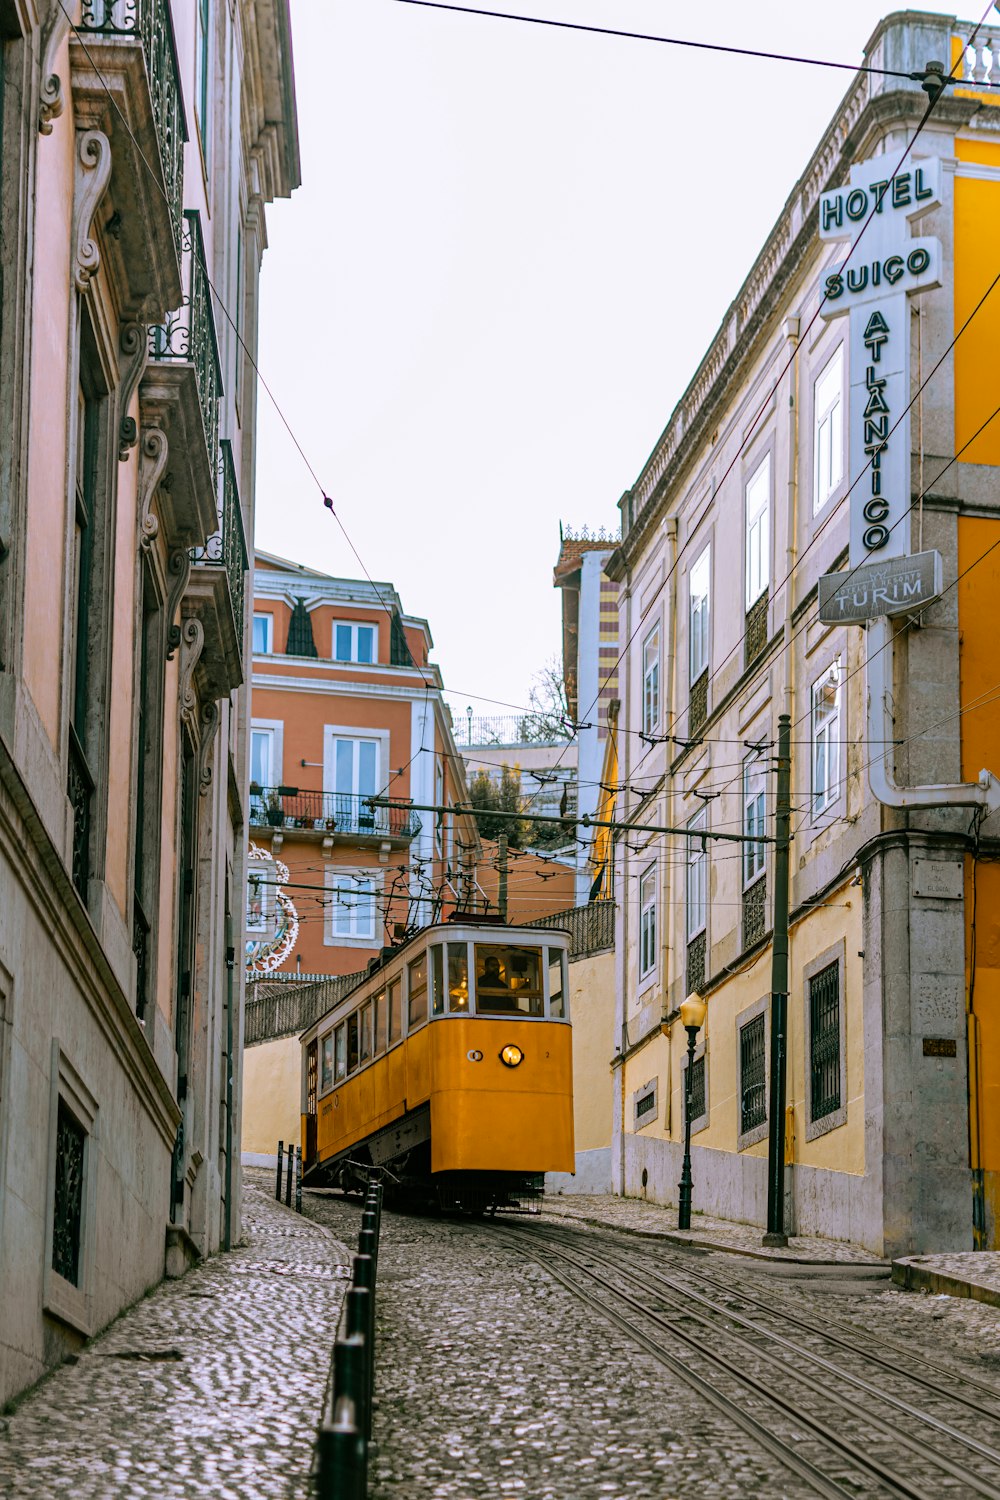 a yellow trolley is going down a cobblestone street